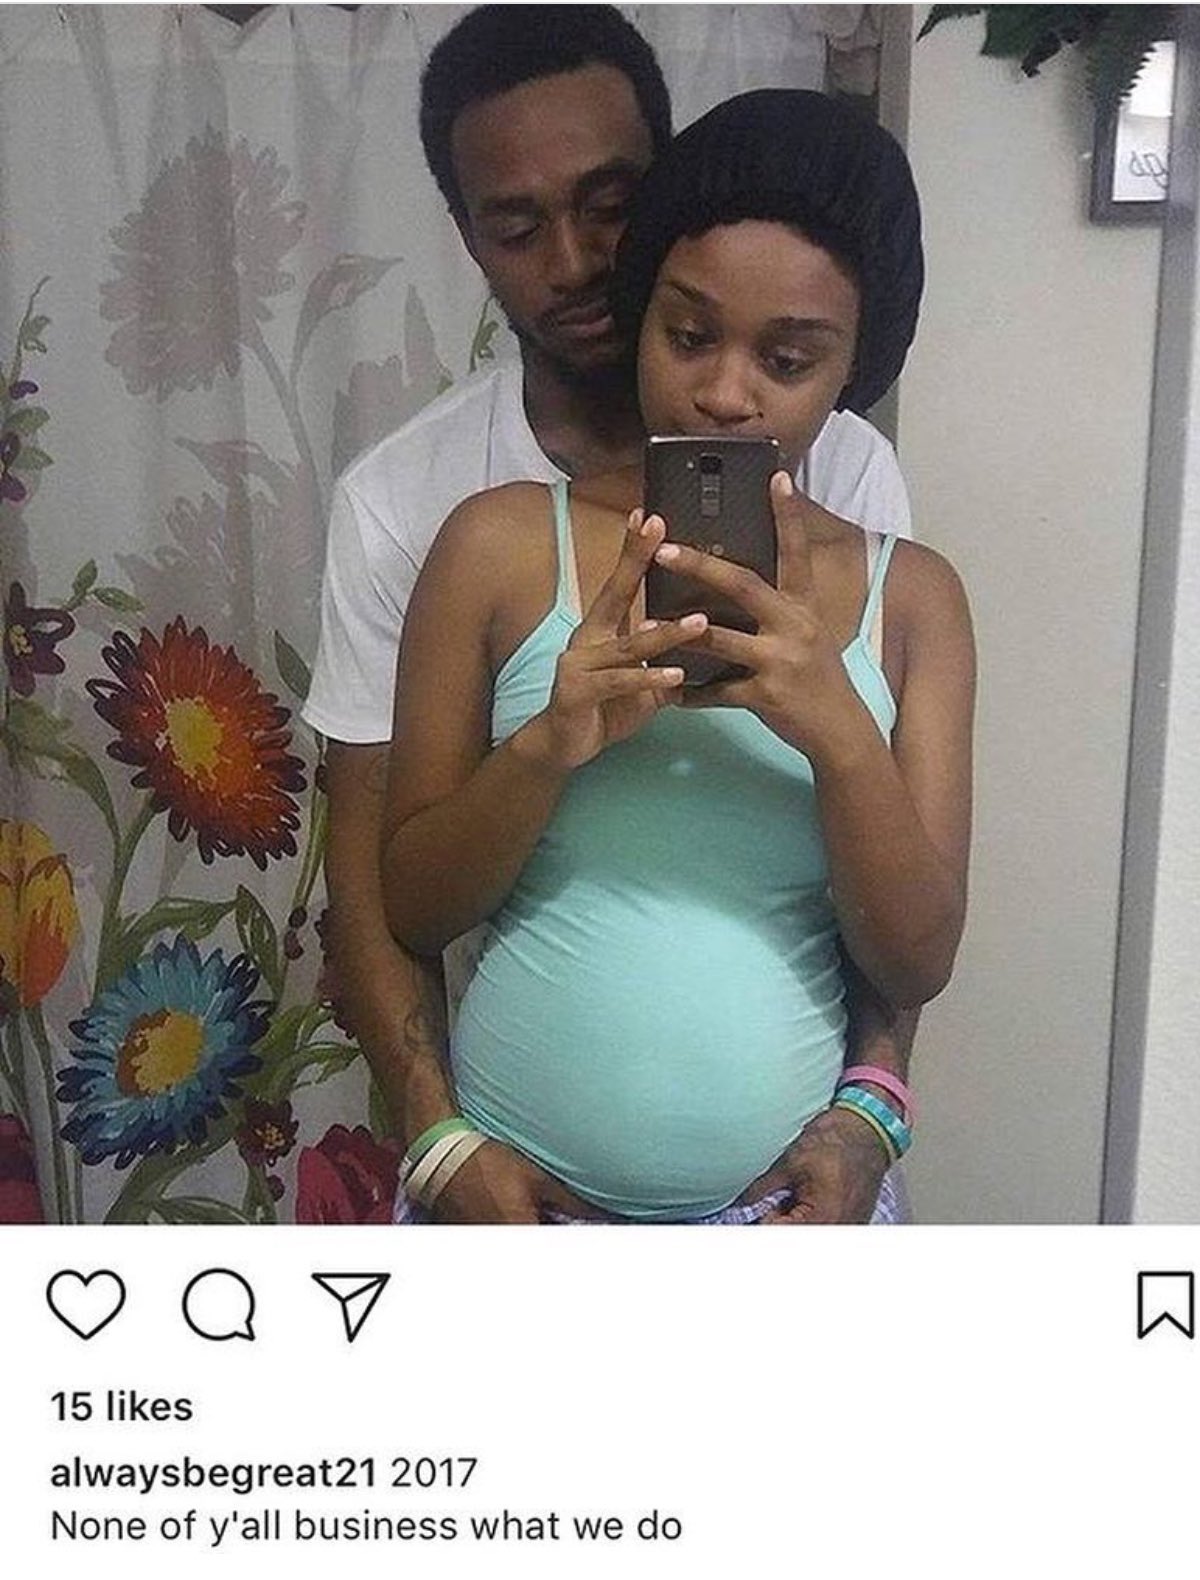 Man Goes Viral After Doing BABY MAMA REVEAL PARTY On Instagram 2